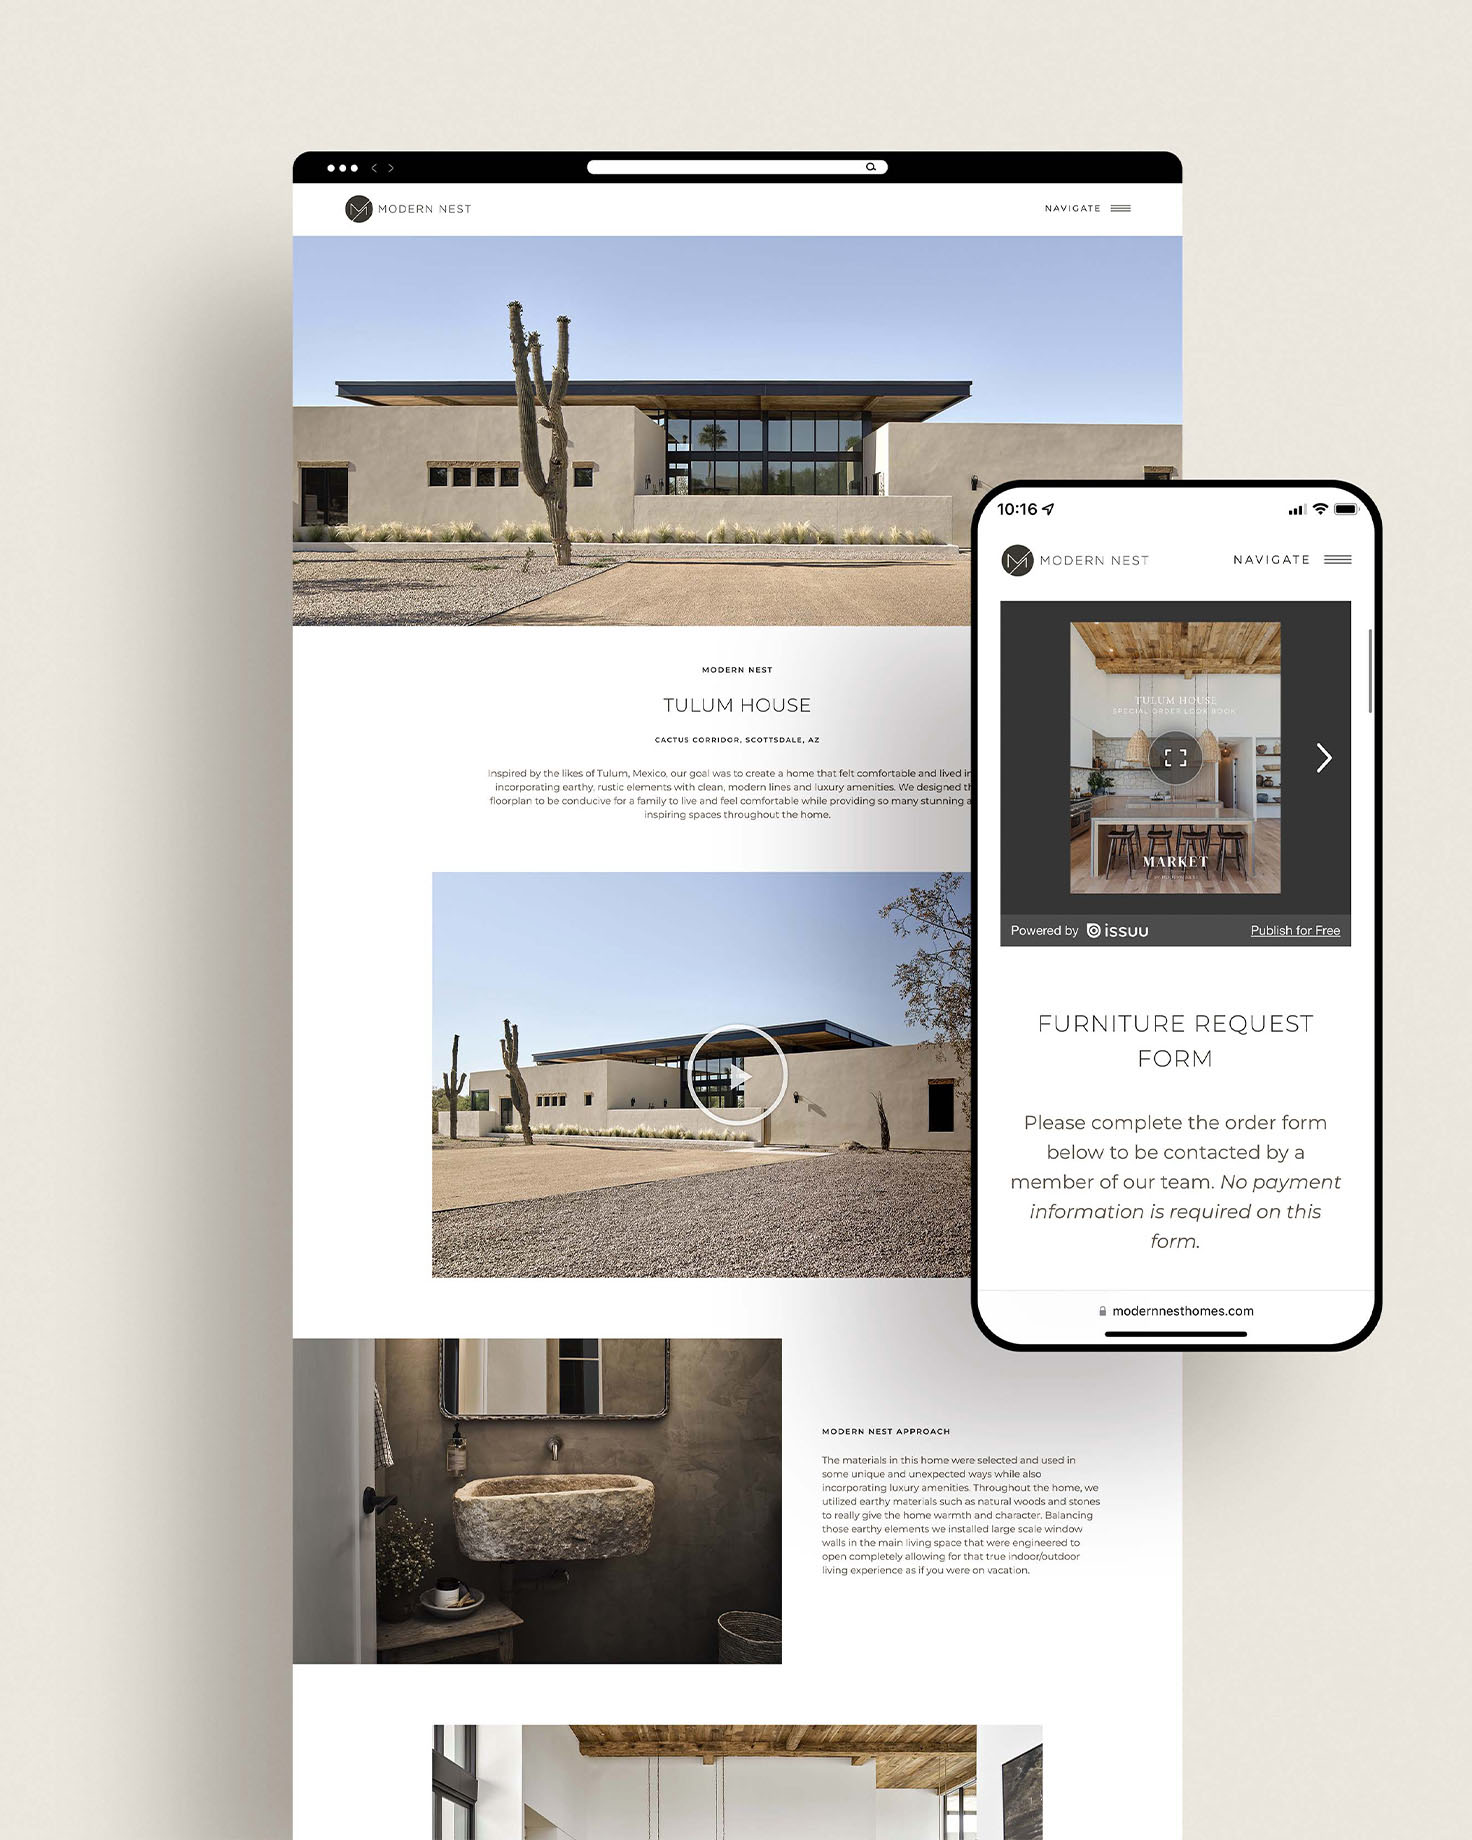 Mobile and Website Design mockup for Modern Nest - Whiskey and Red Small Business Branding and Website Design Packages